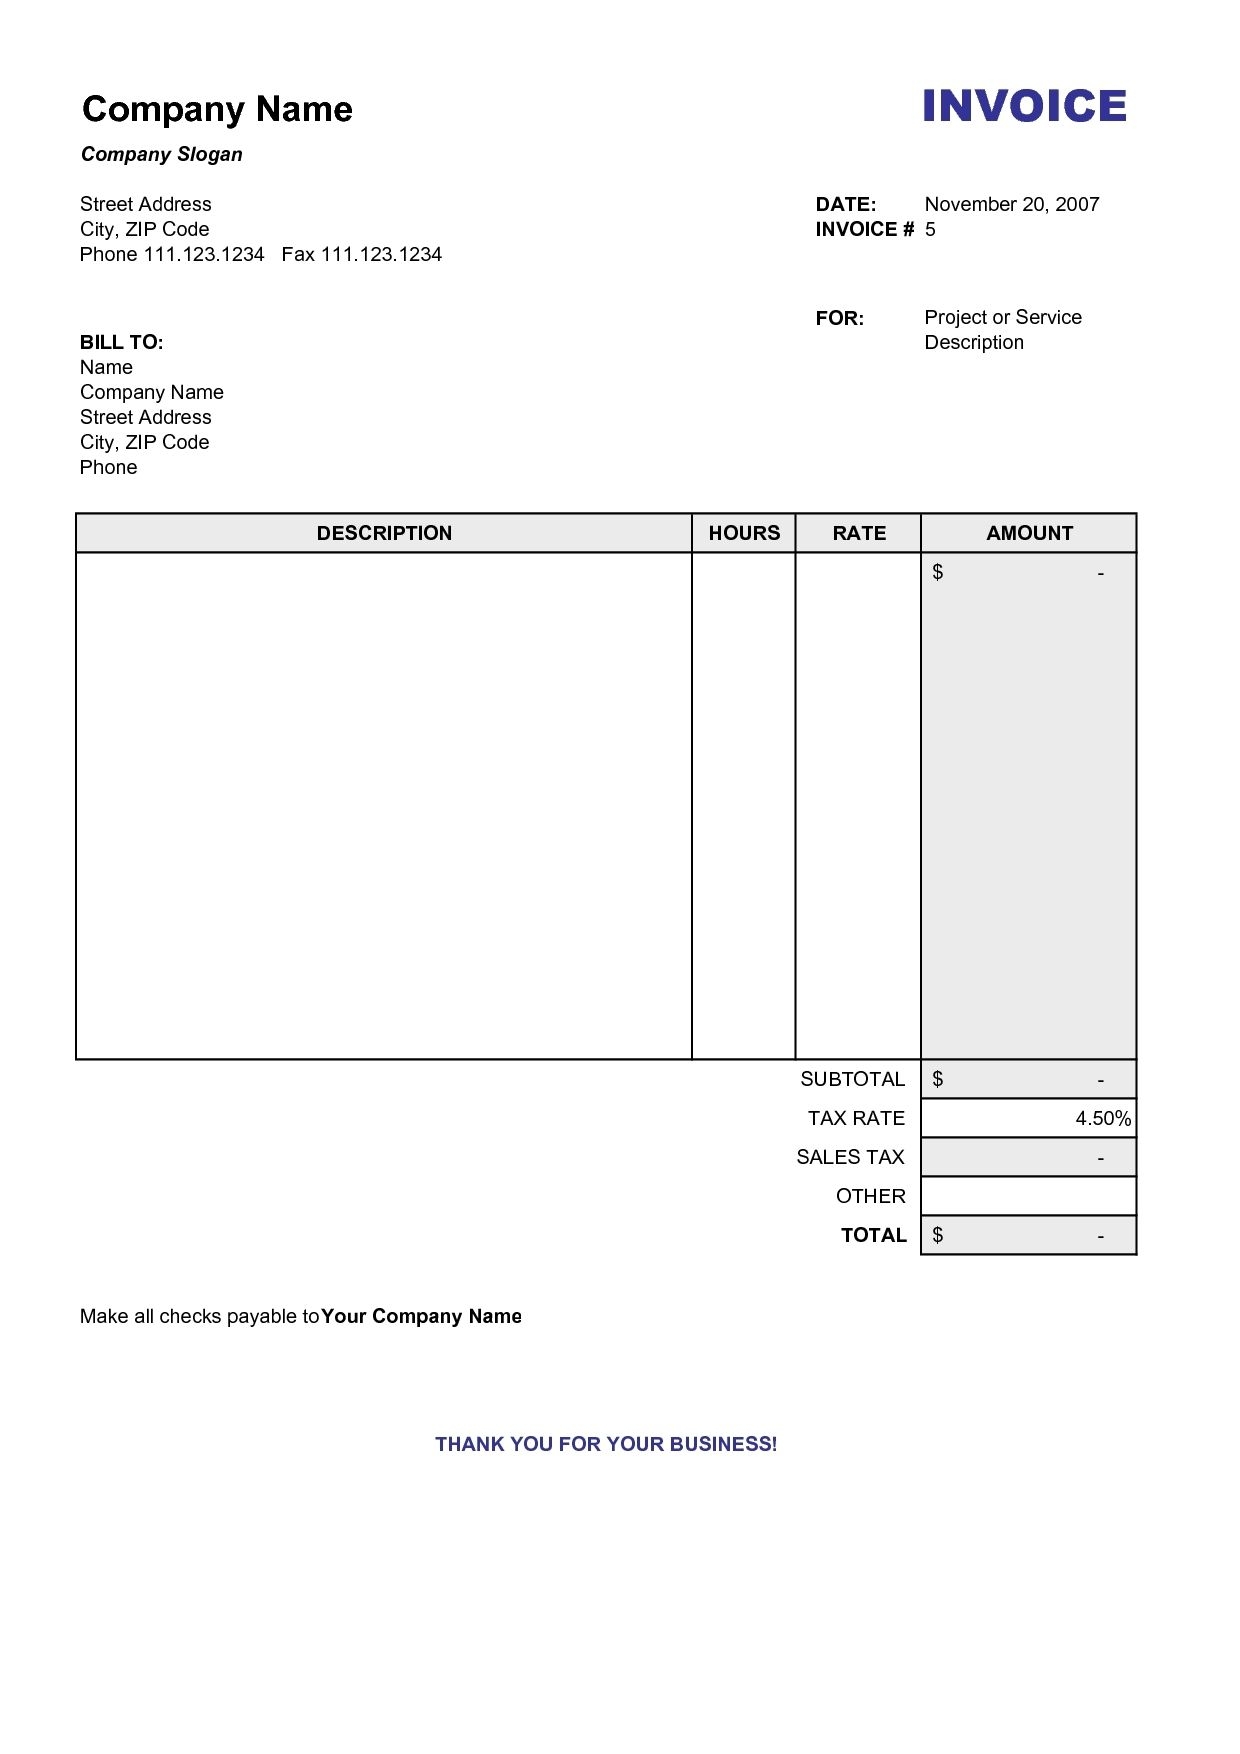 copy of a blank invoice invoice template free 2016 copy of copy of a invoce